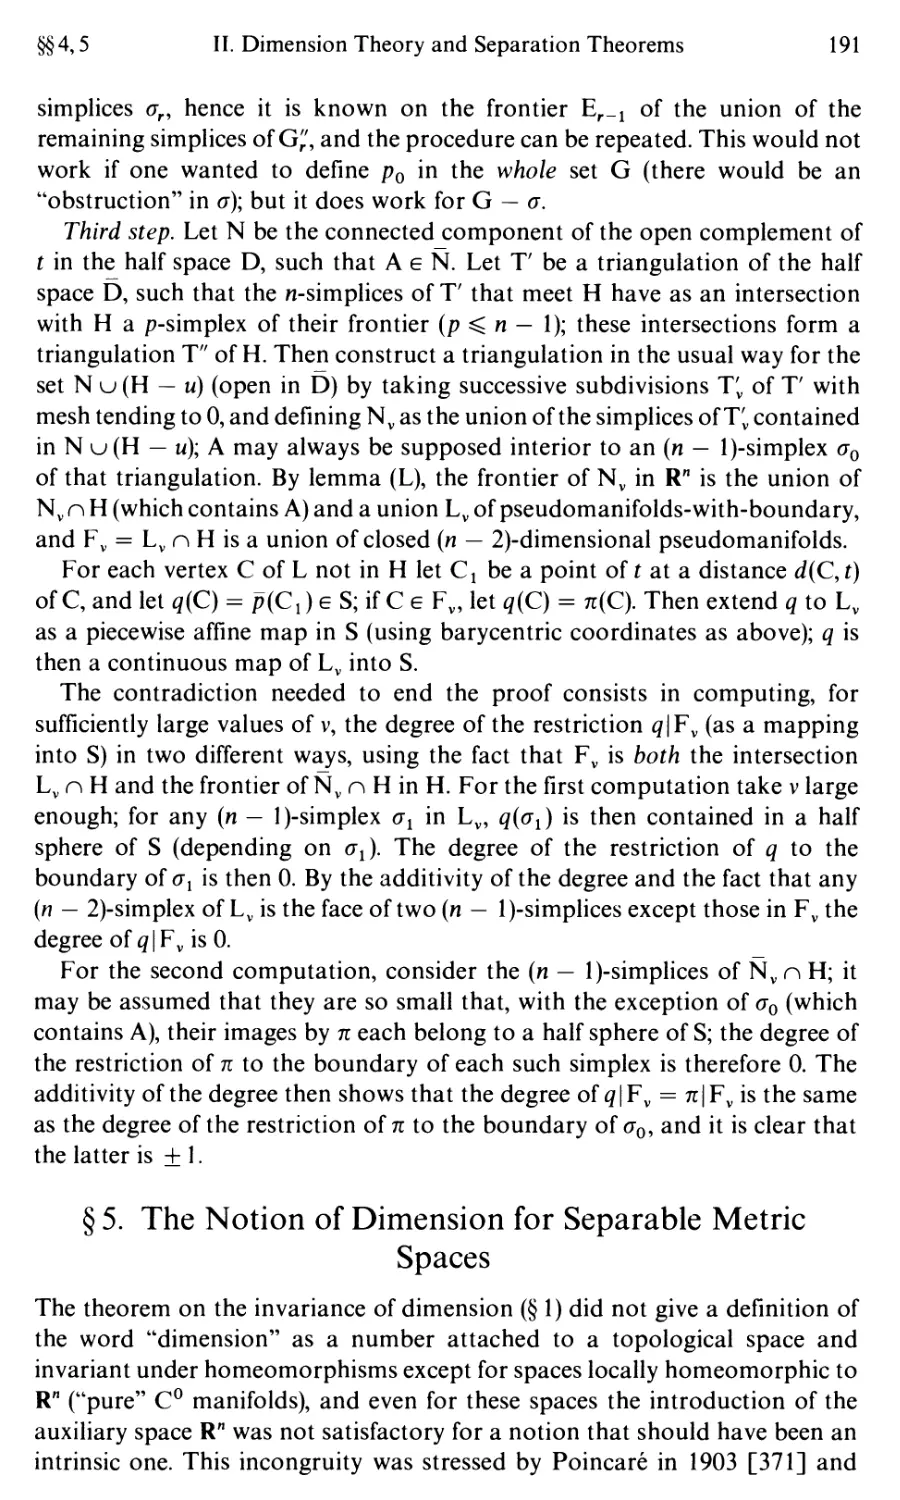 §5. The Notion of Dimension for Separable Metric Spaces